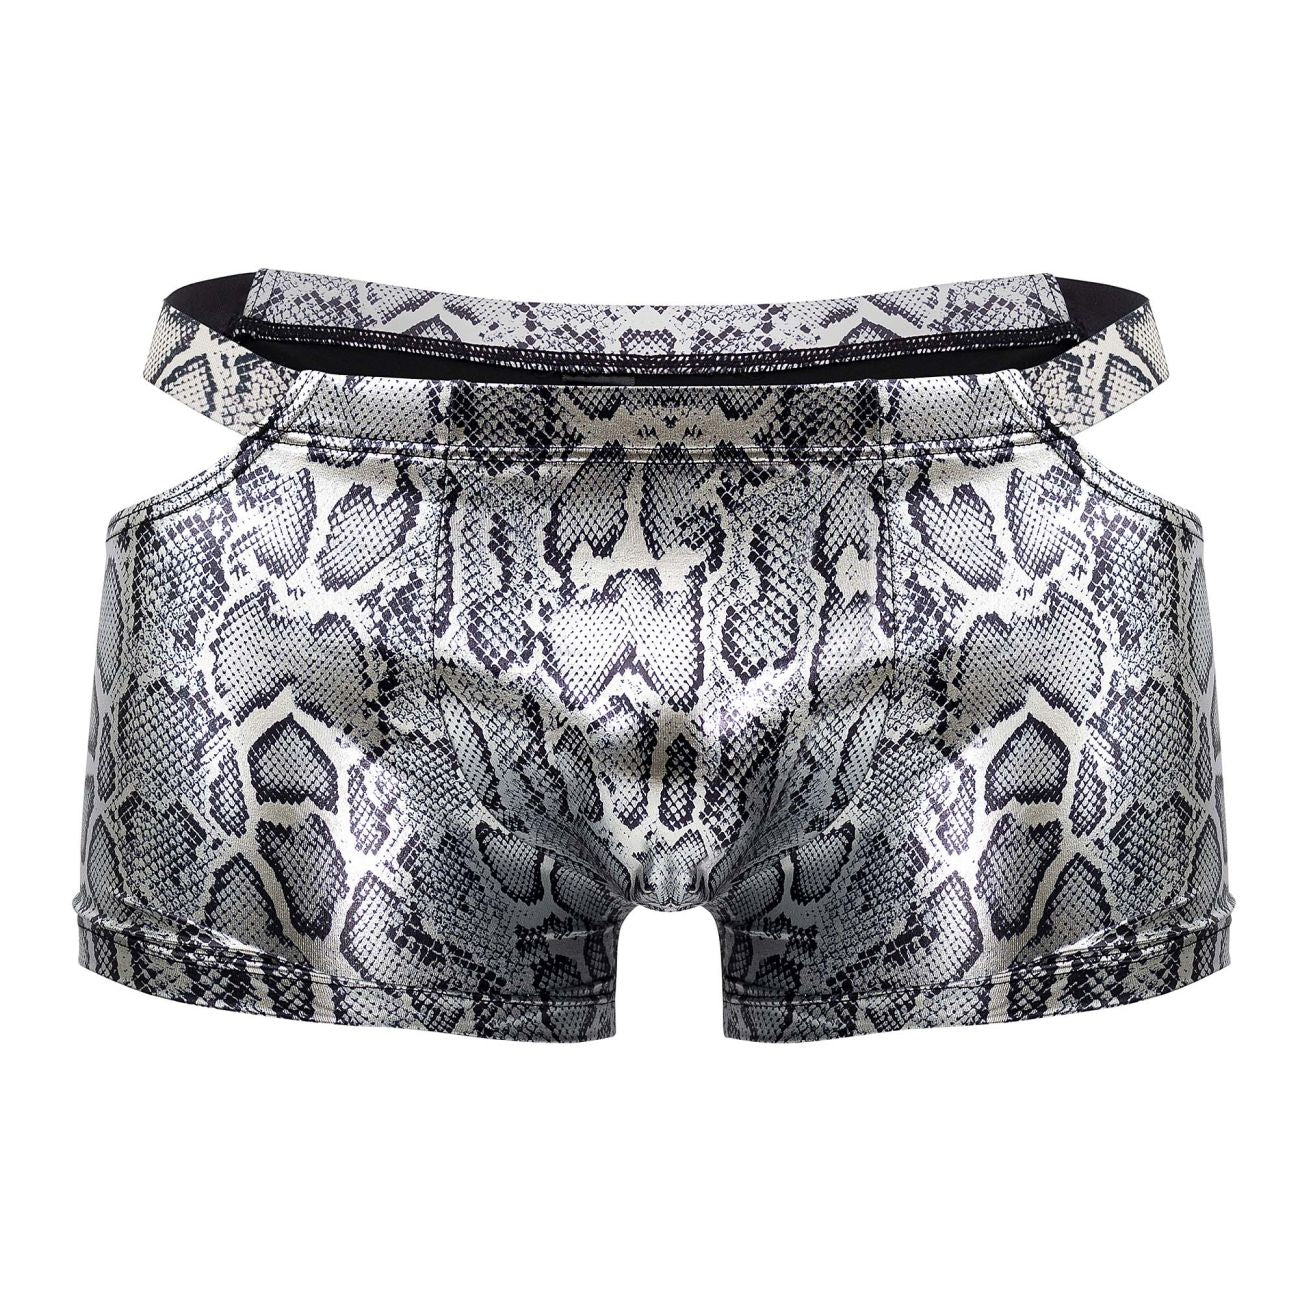 Male Power 153-282 S-naked Pouch Short Silver-Black